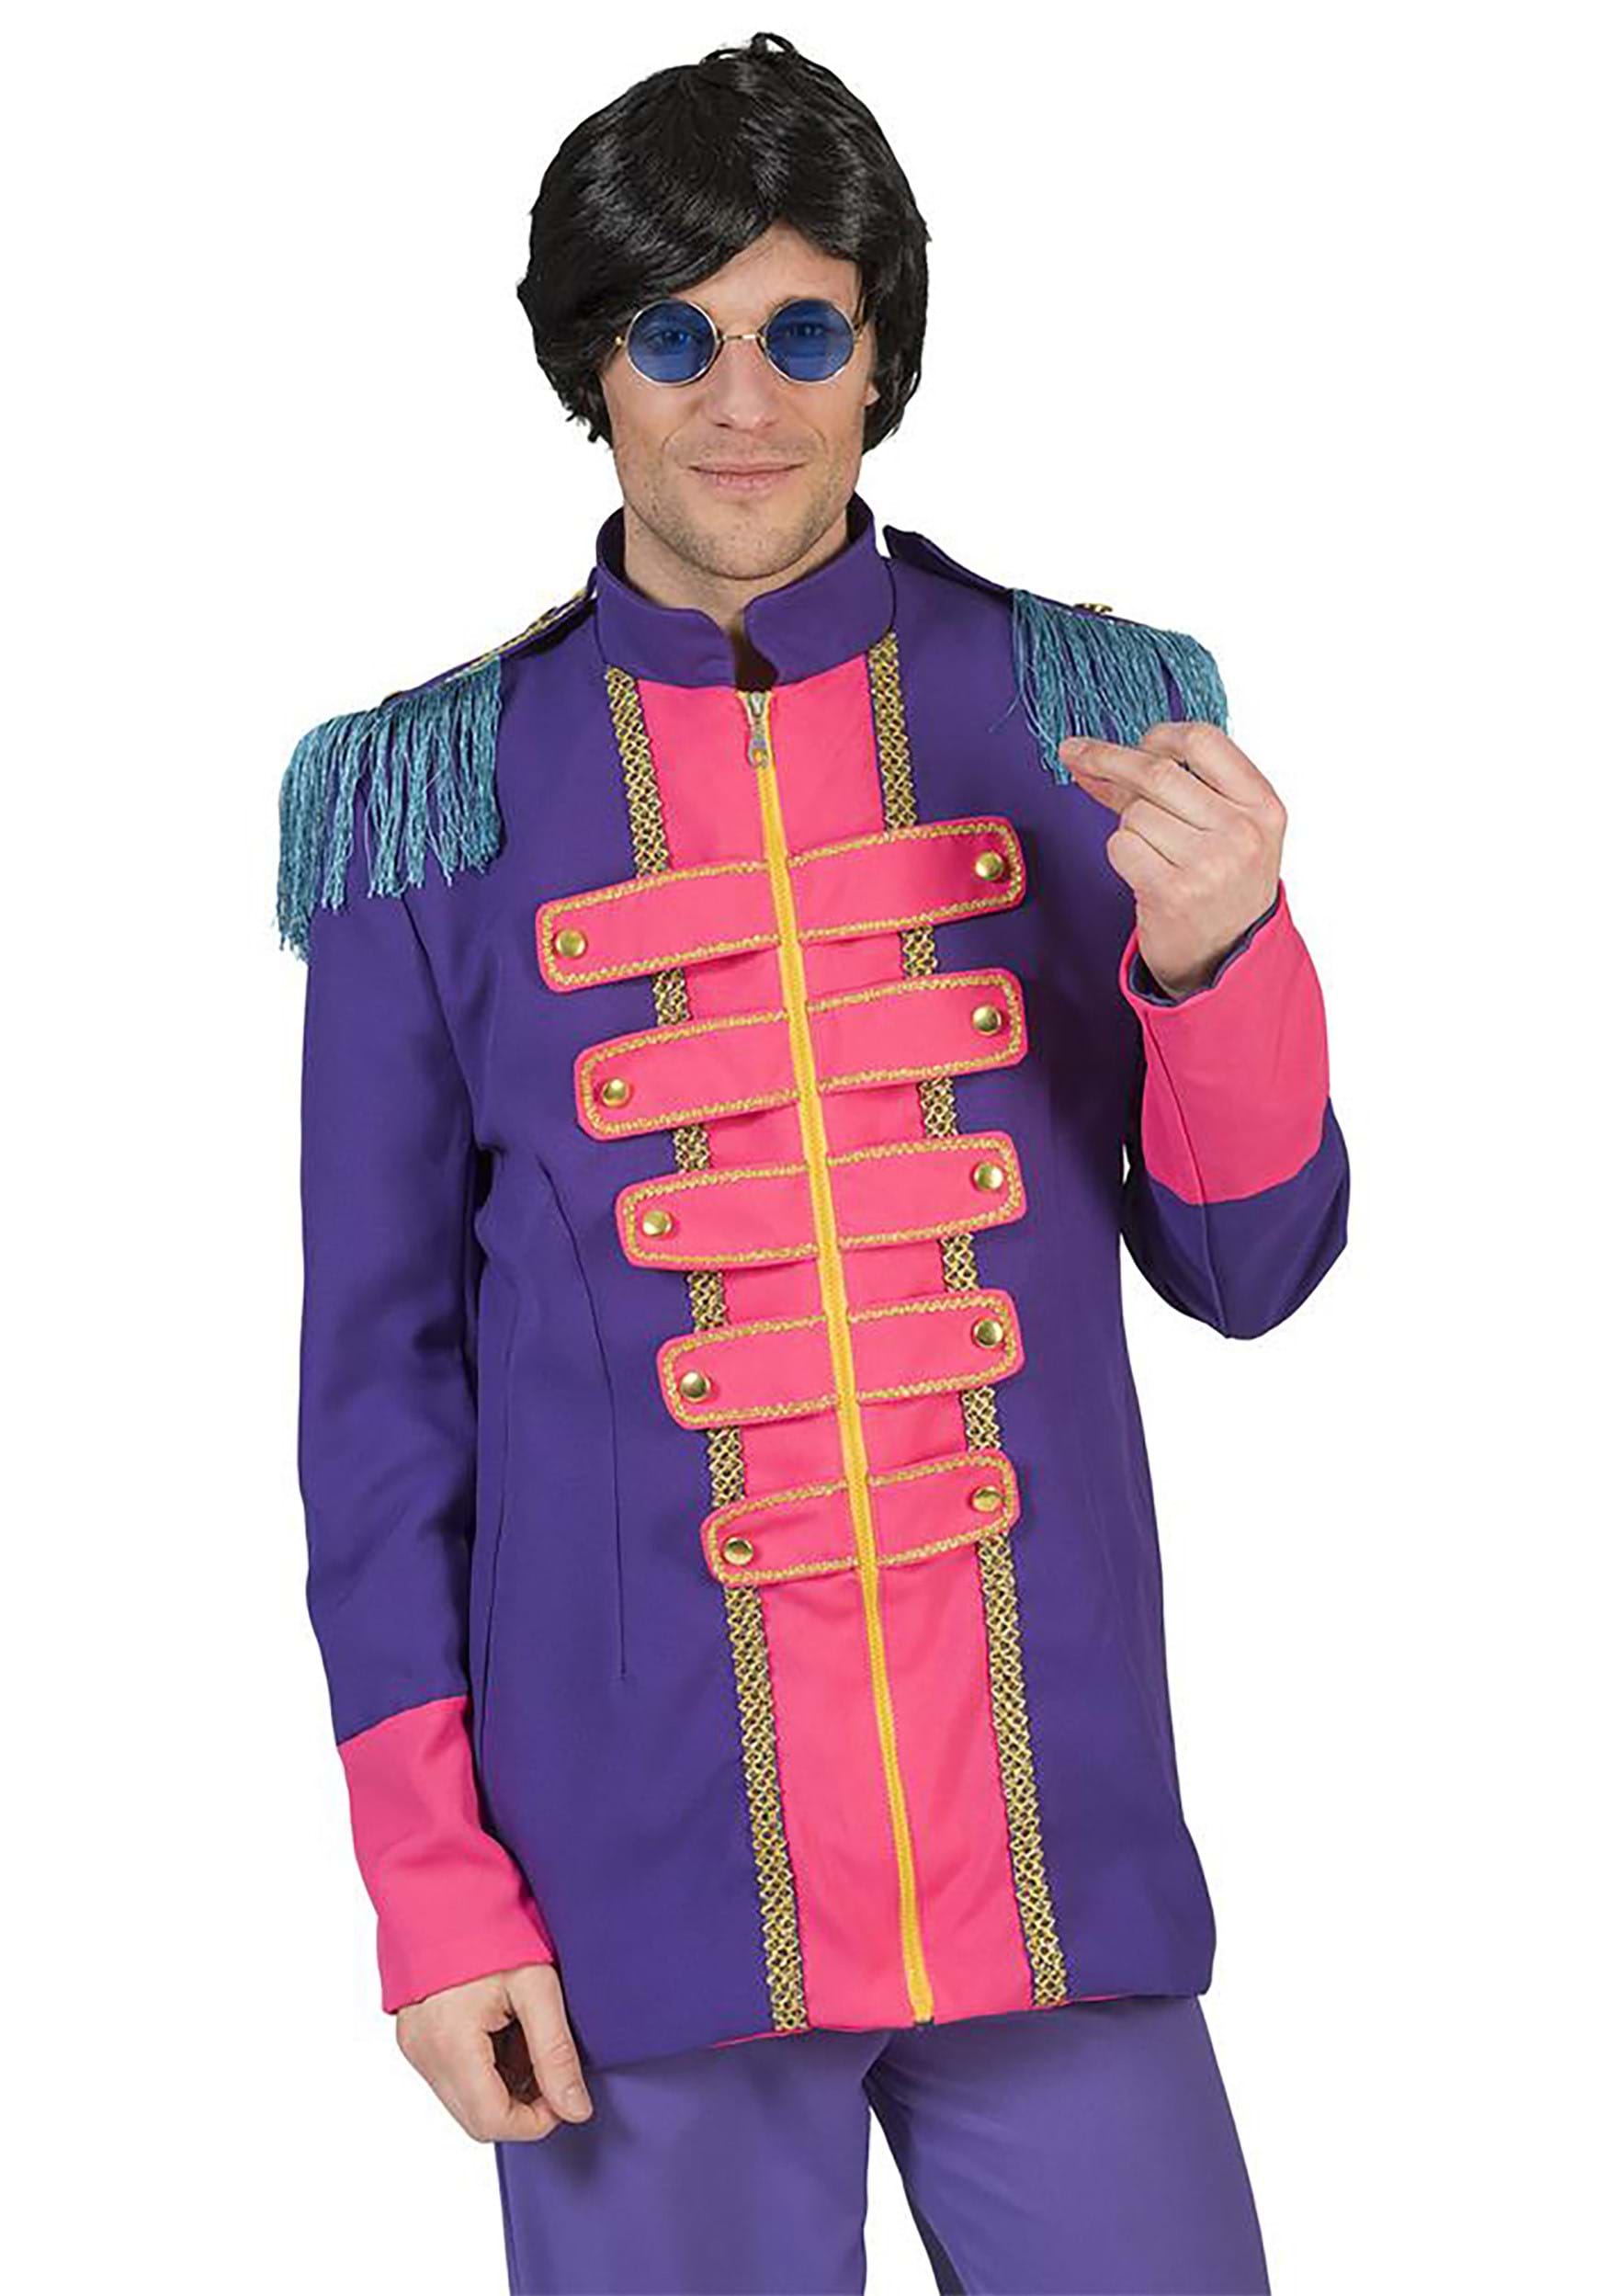 Image of Sgt Pepper Album Inspired Purple Jacket | Costume Jackets ID FY608374-M